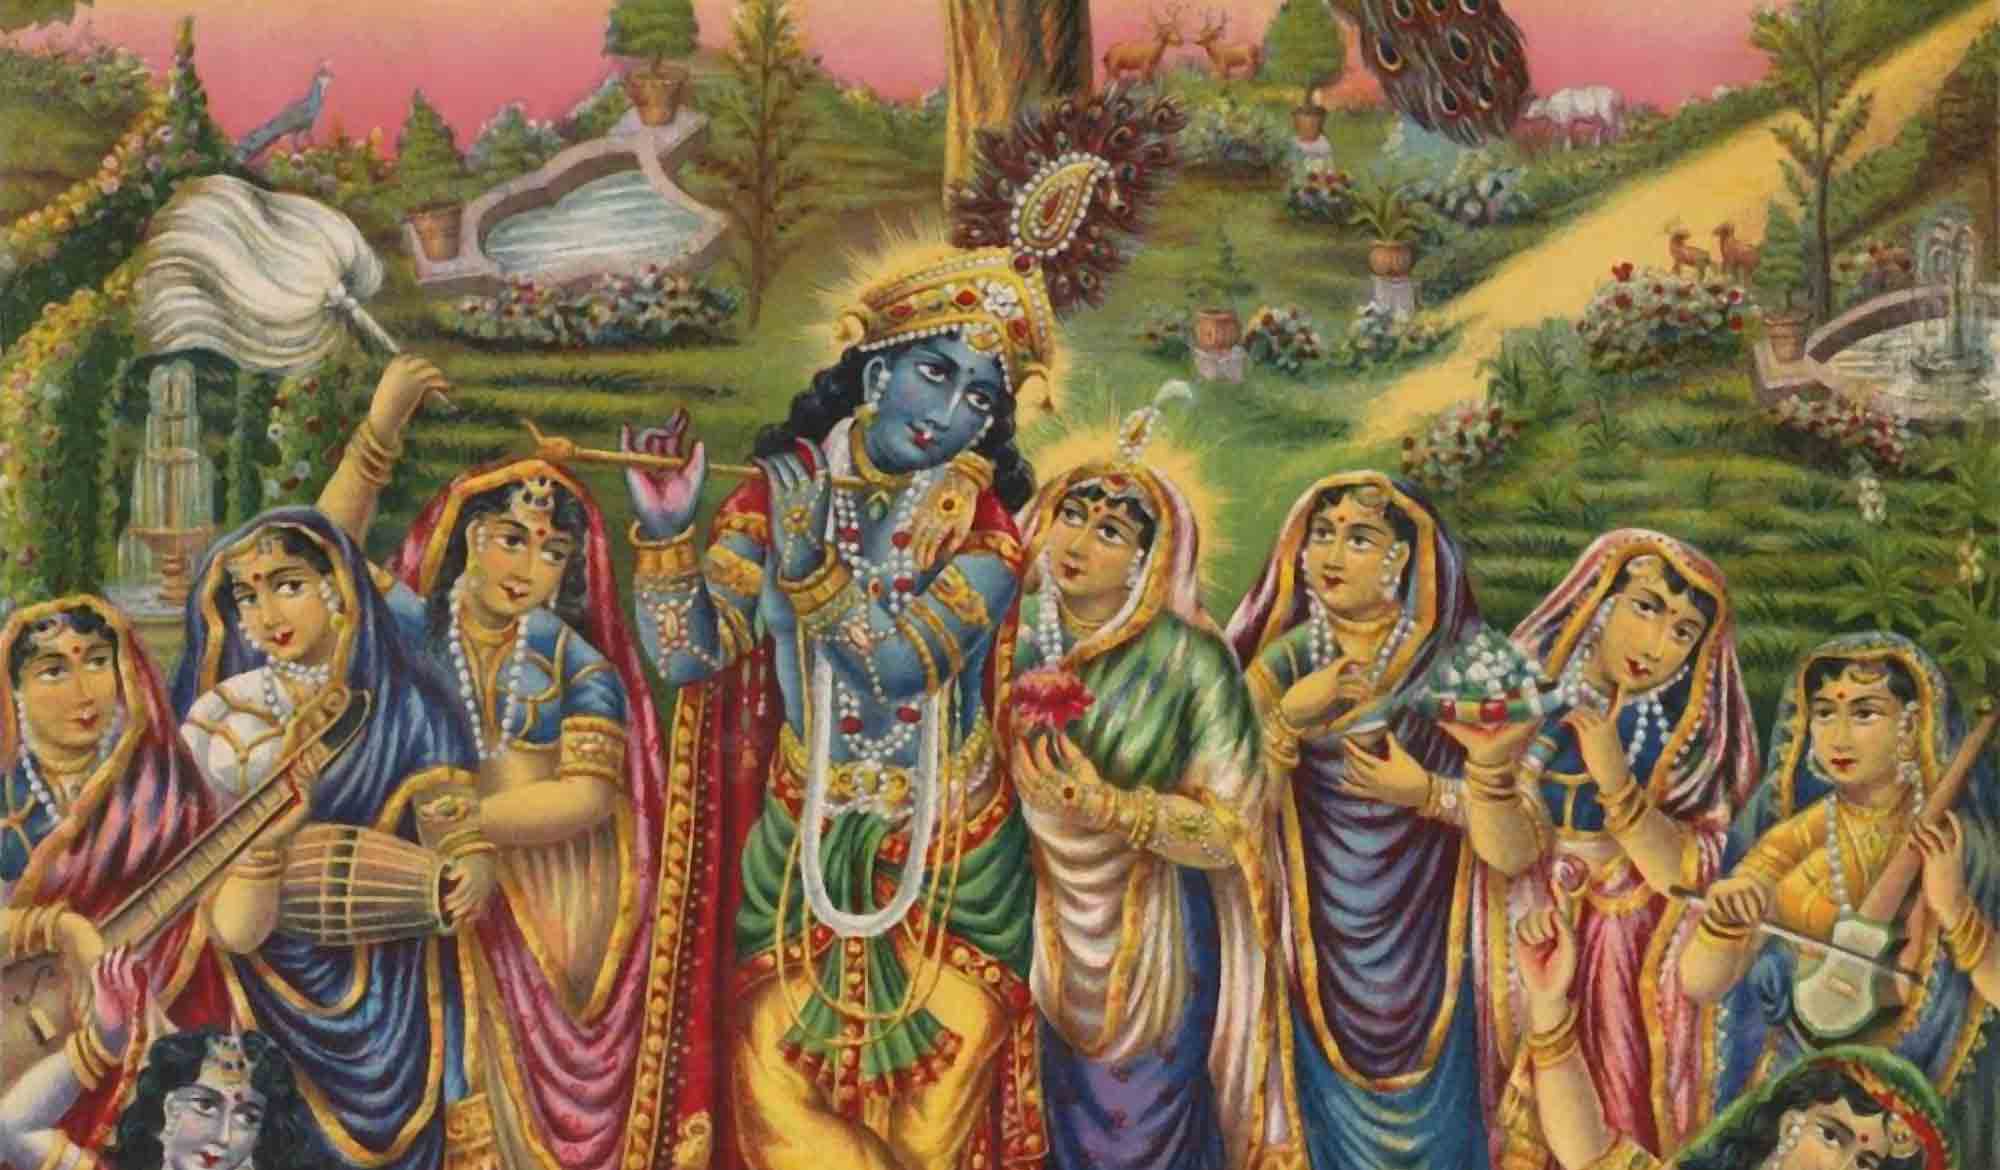 Śaraṇāgati (Surrendered to the Lord's Shelter)